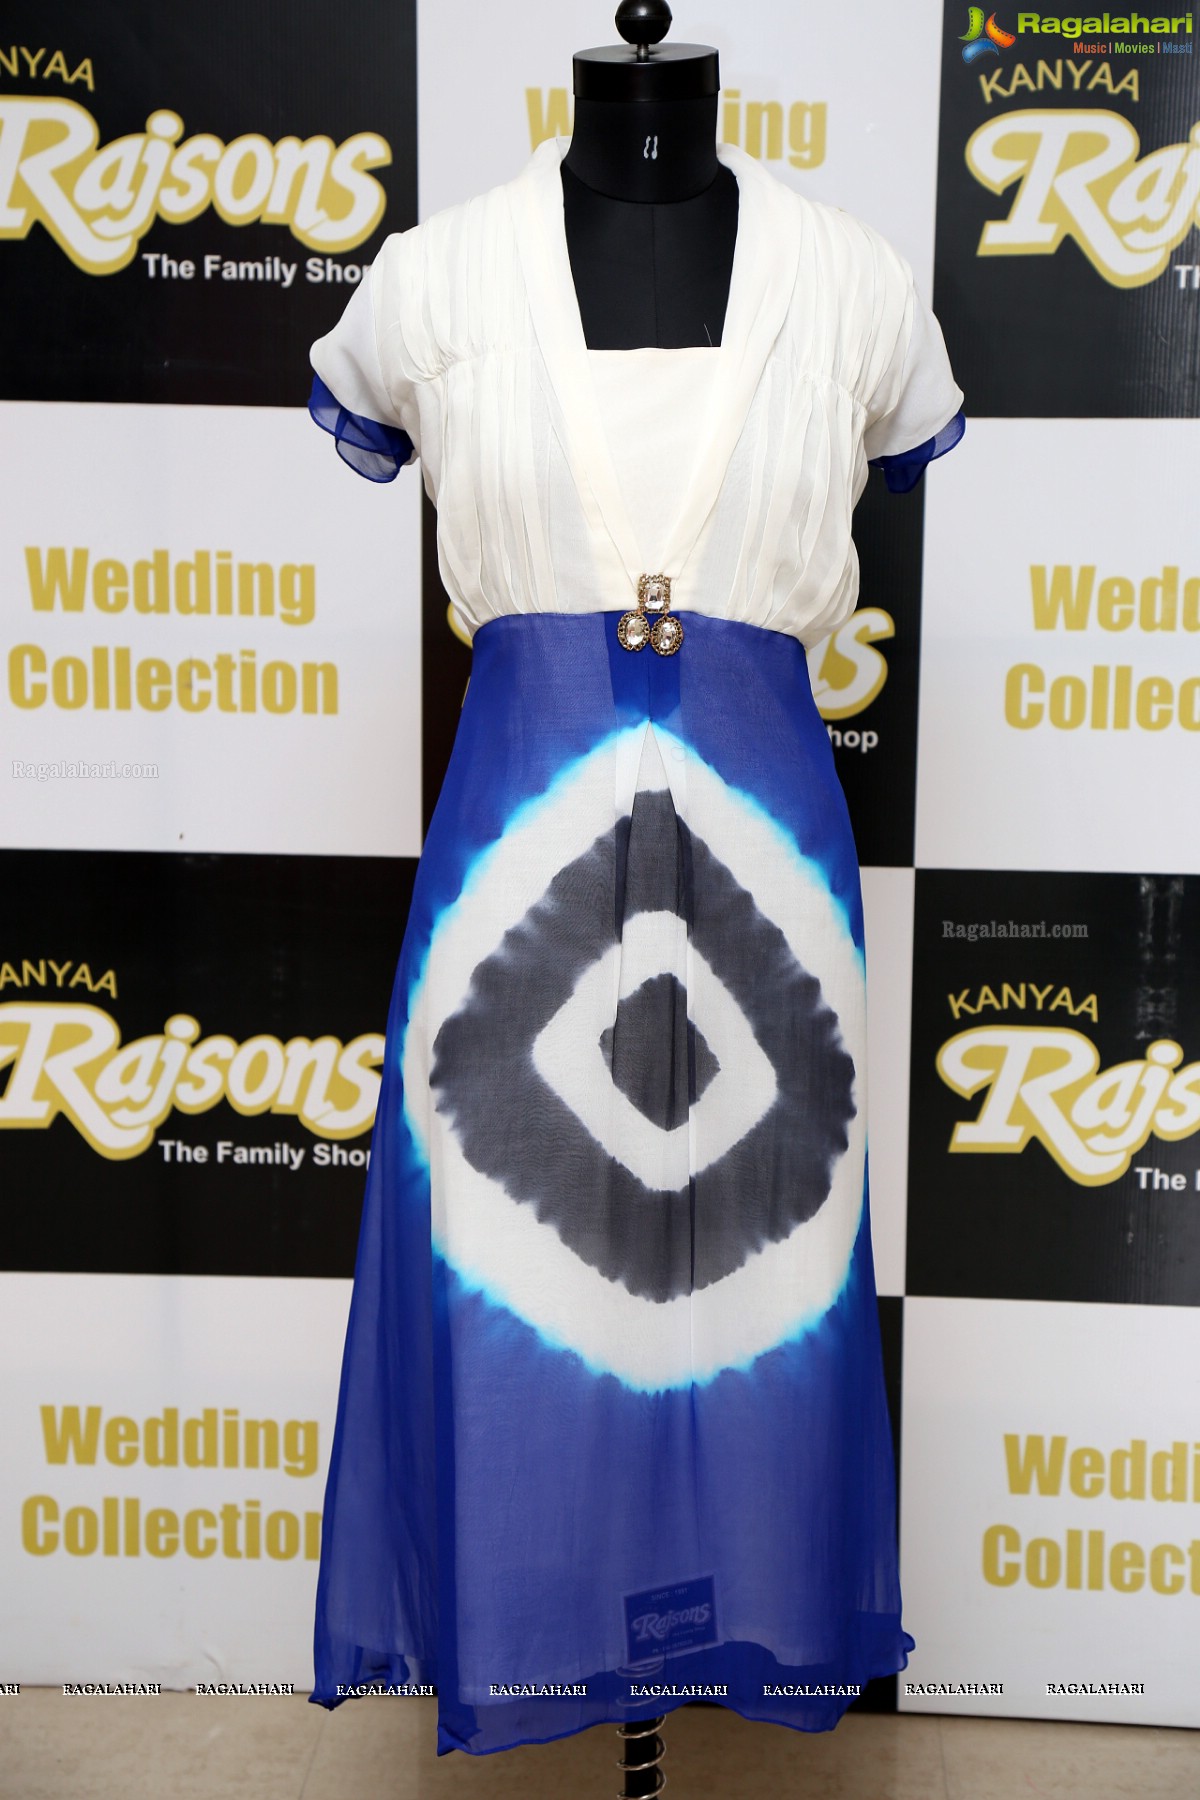 Kanyaa Rajsons - Biggest and Hautest Fashion Hub launches Wide Collection in Hyderabad